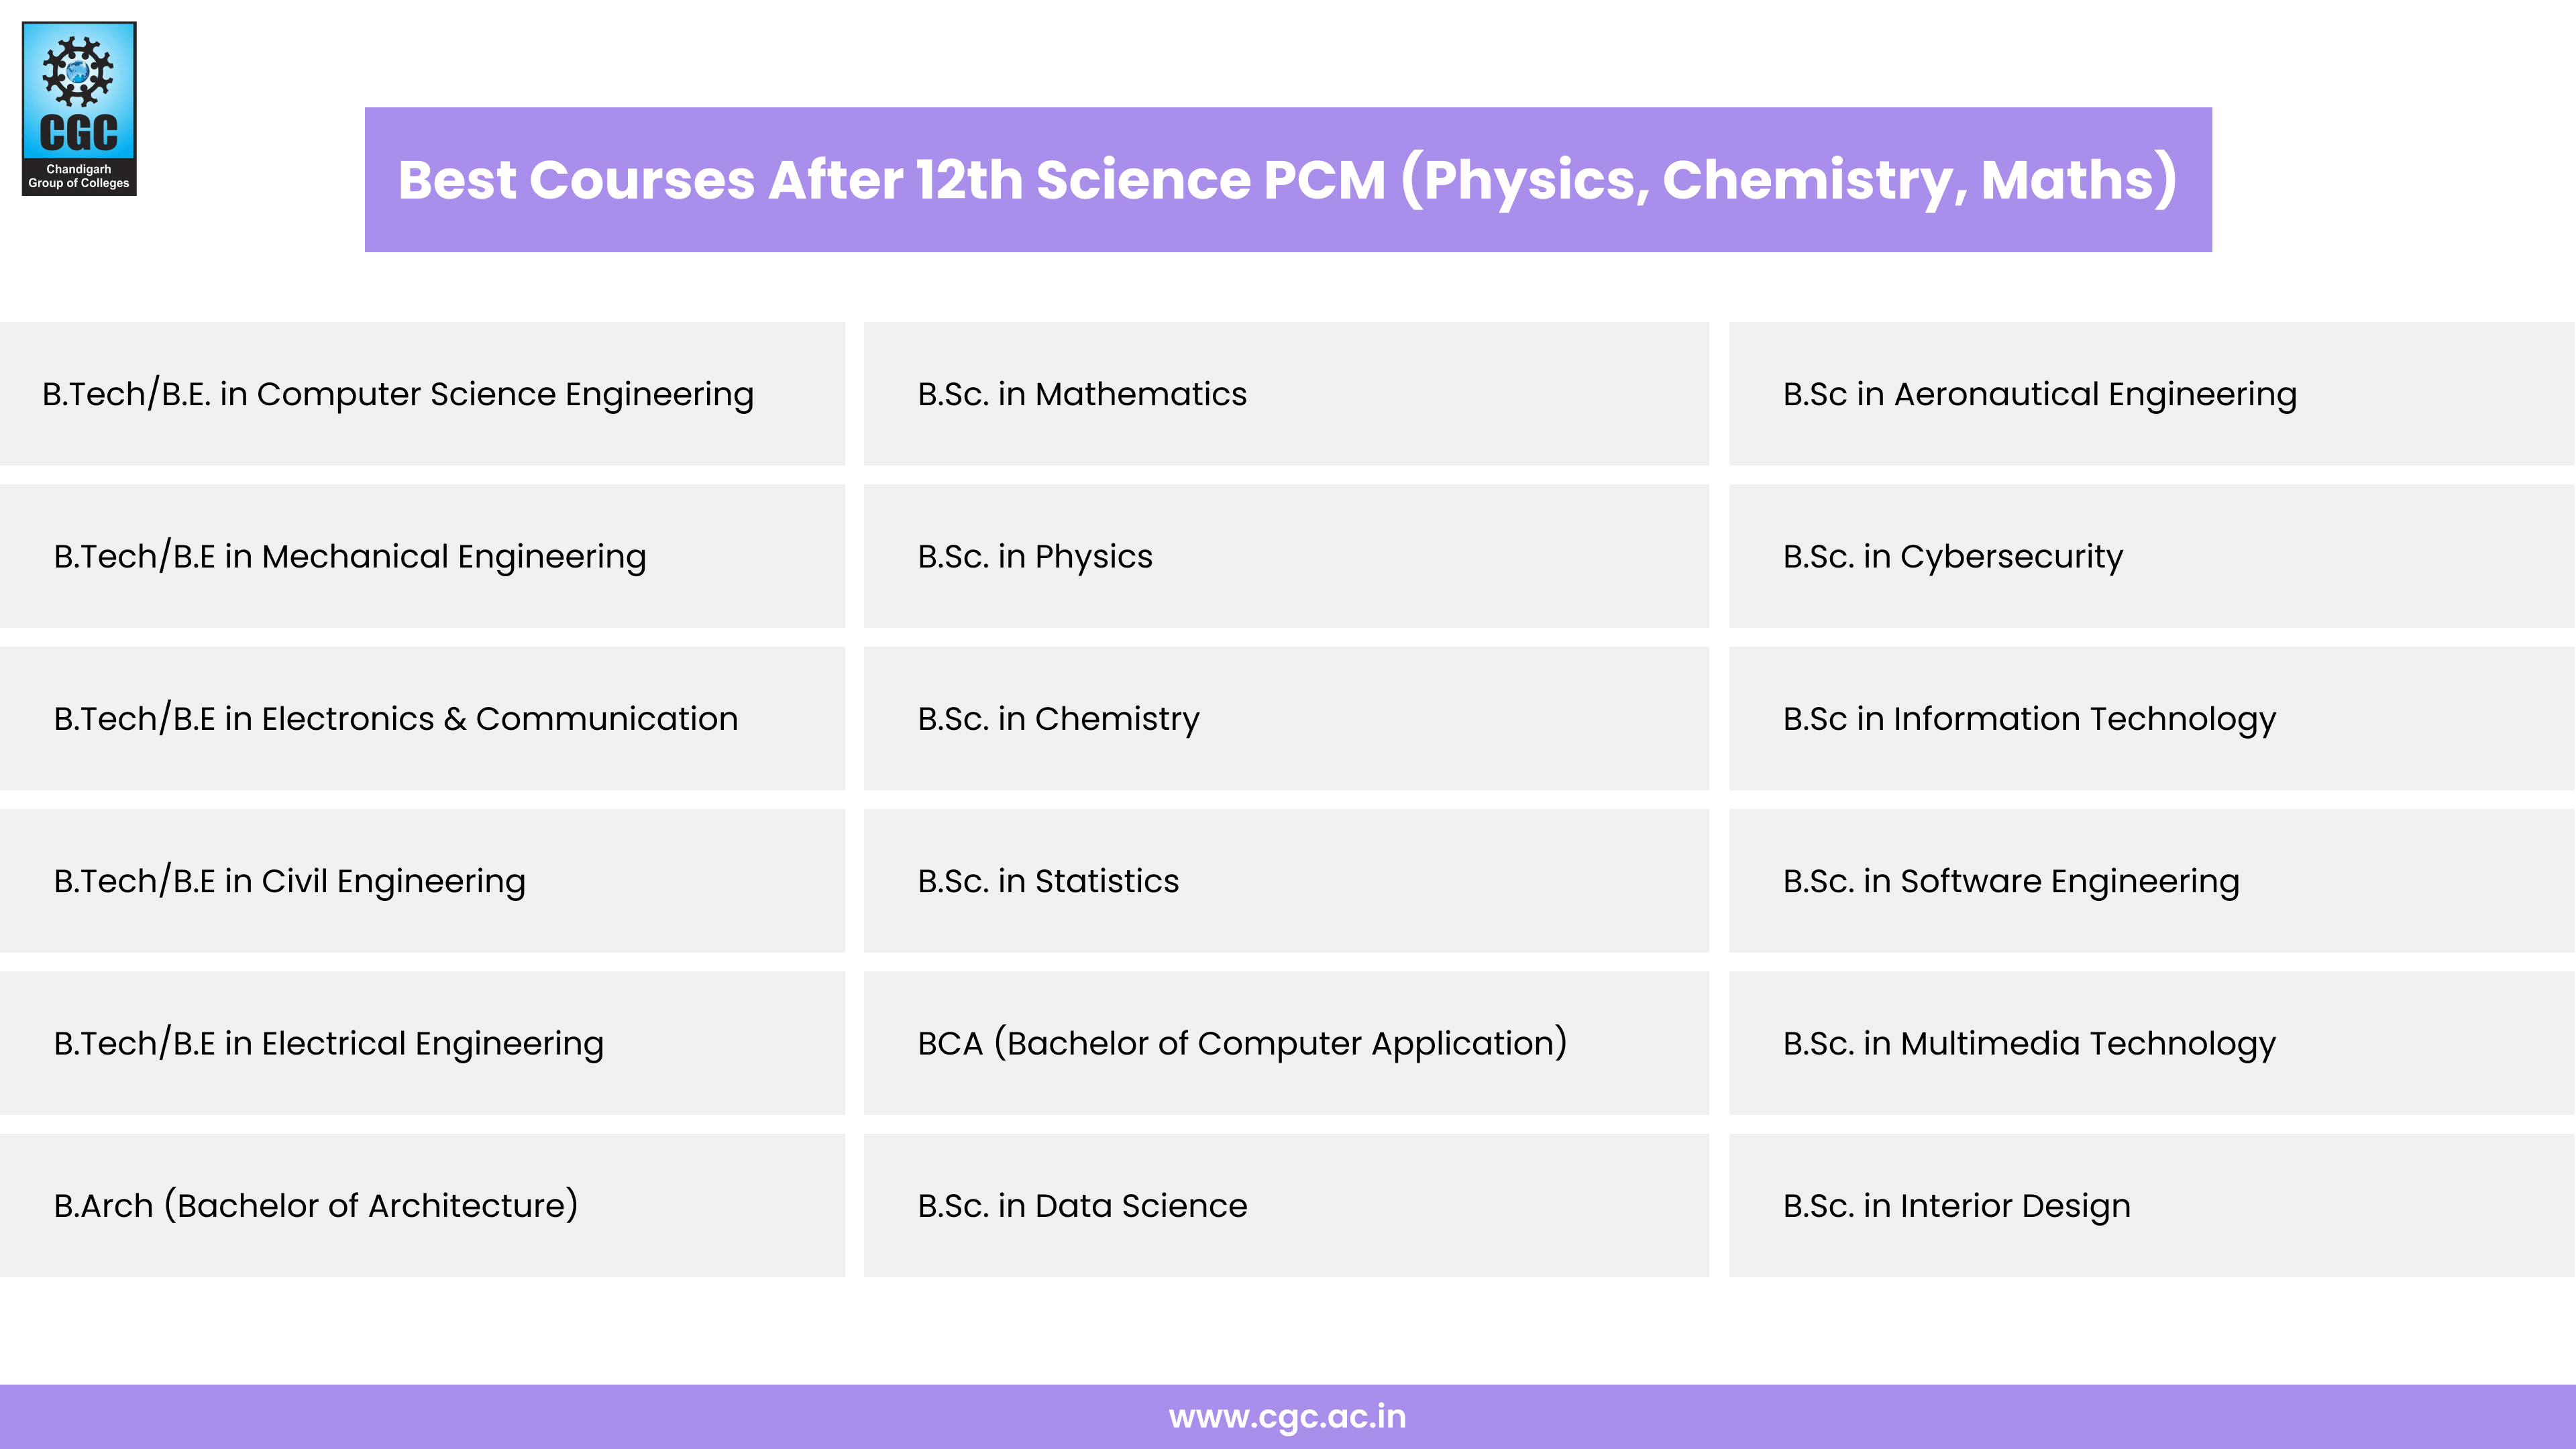 Best Courses After 12th Science PCM